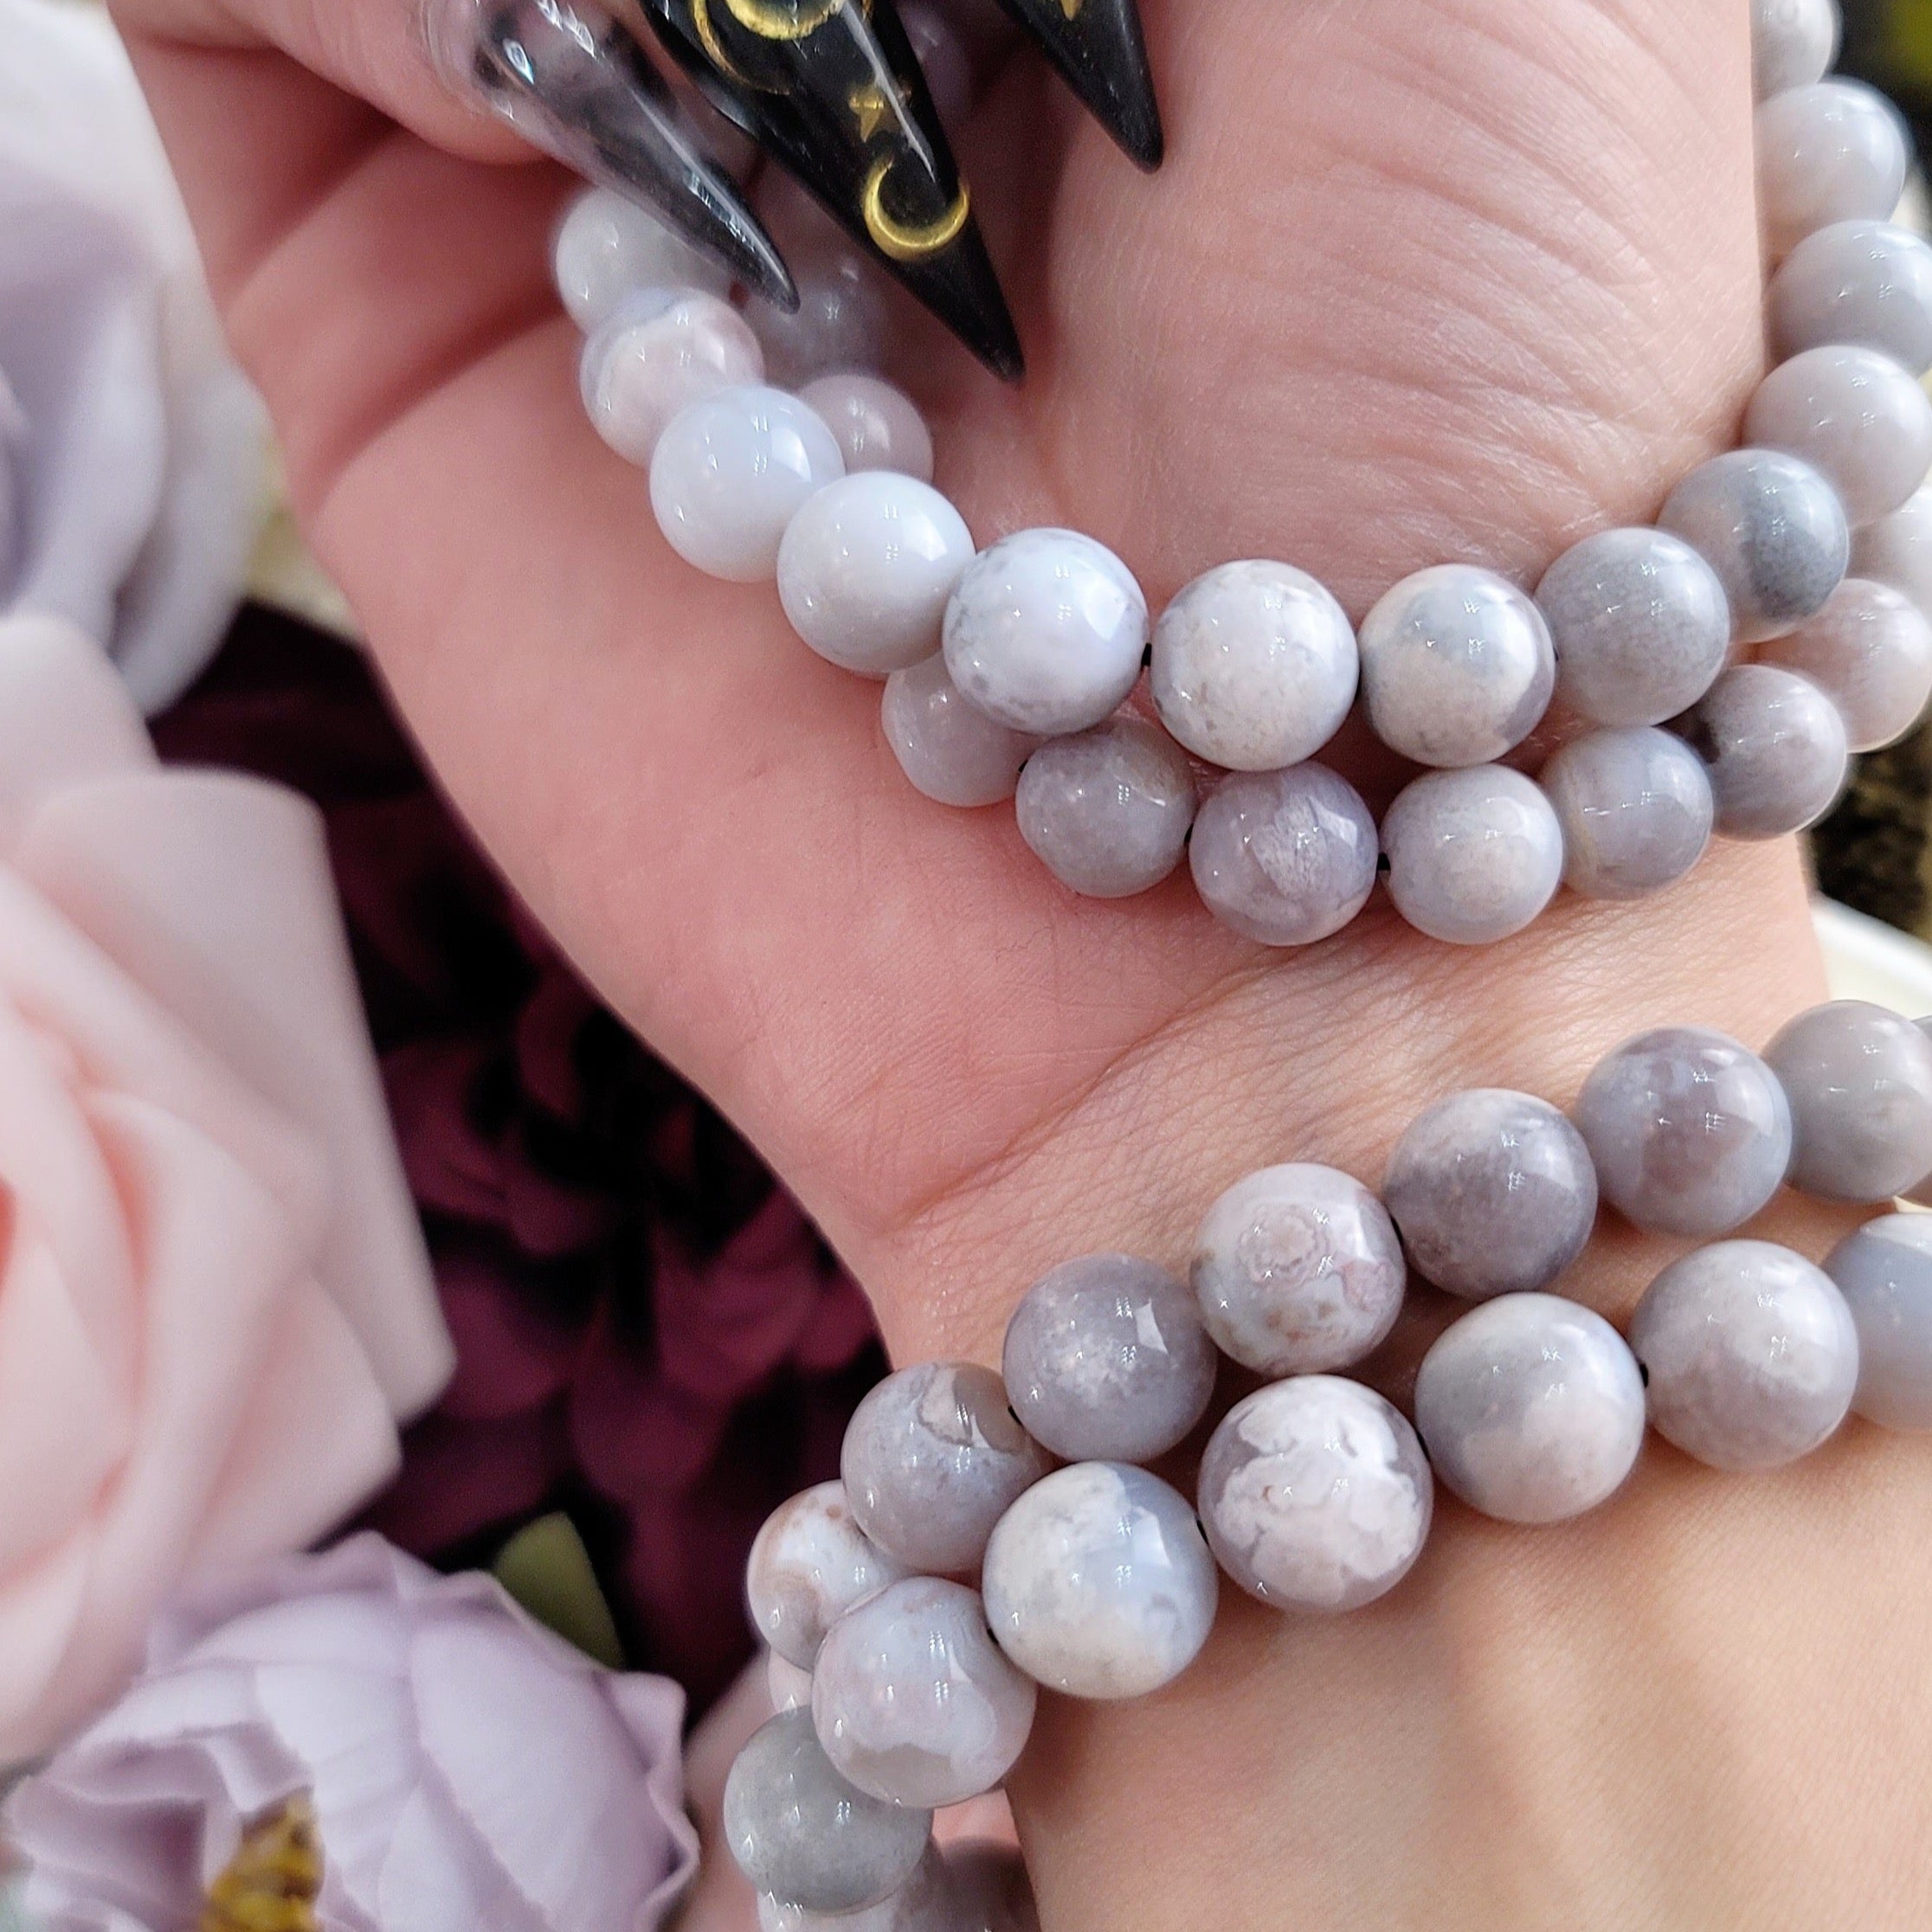 Lavender Dreams Flower Agate Bracelet (High Quality) for Blossoming into your Full Potential